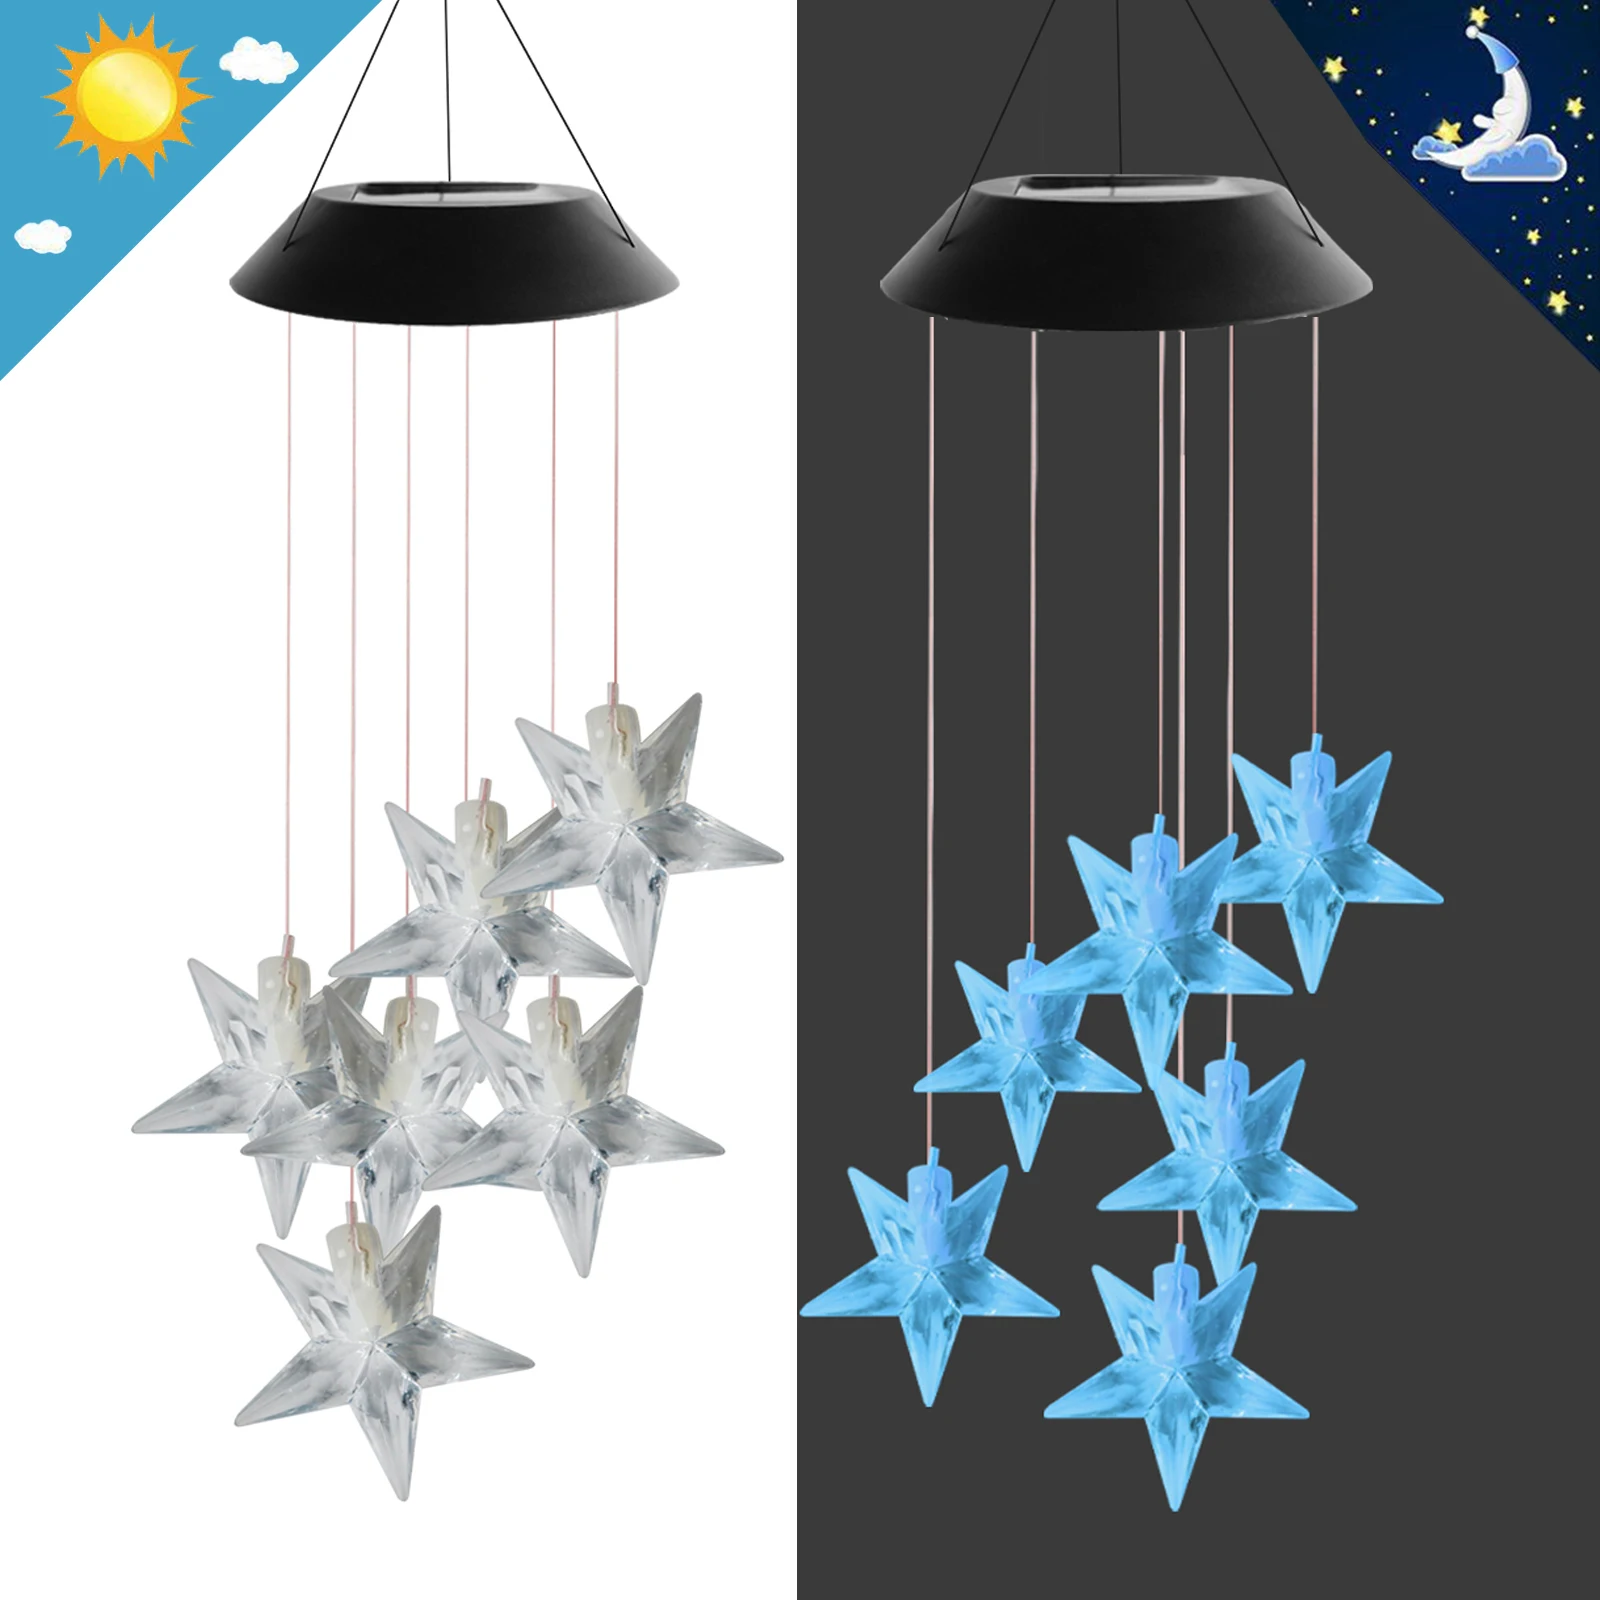 

Dropshipping Solar Power Light Decoration Girls Waterproof Romantic Colorful Stars Shape Wind Chimes Trendy Design, Color changing